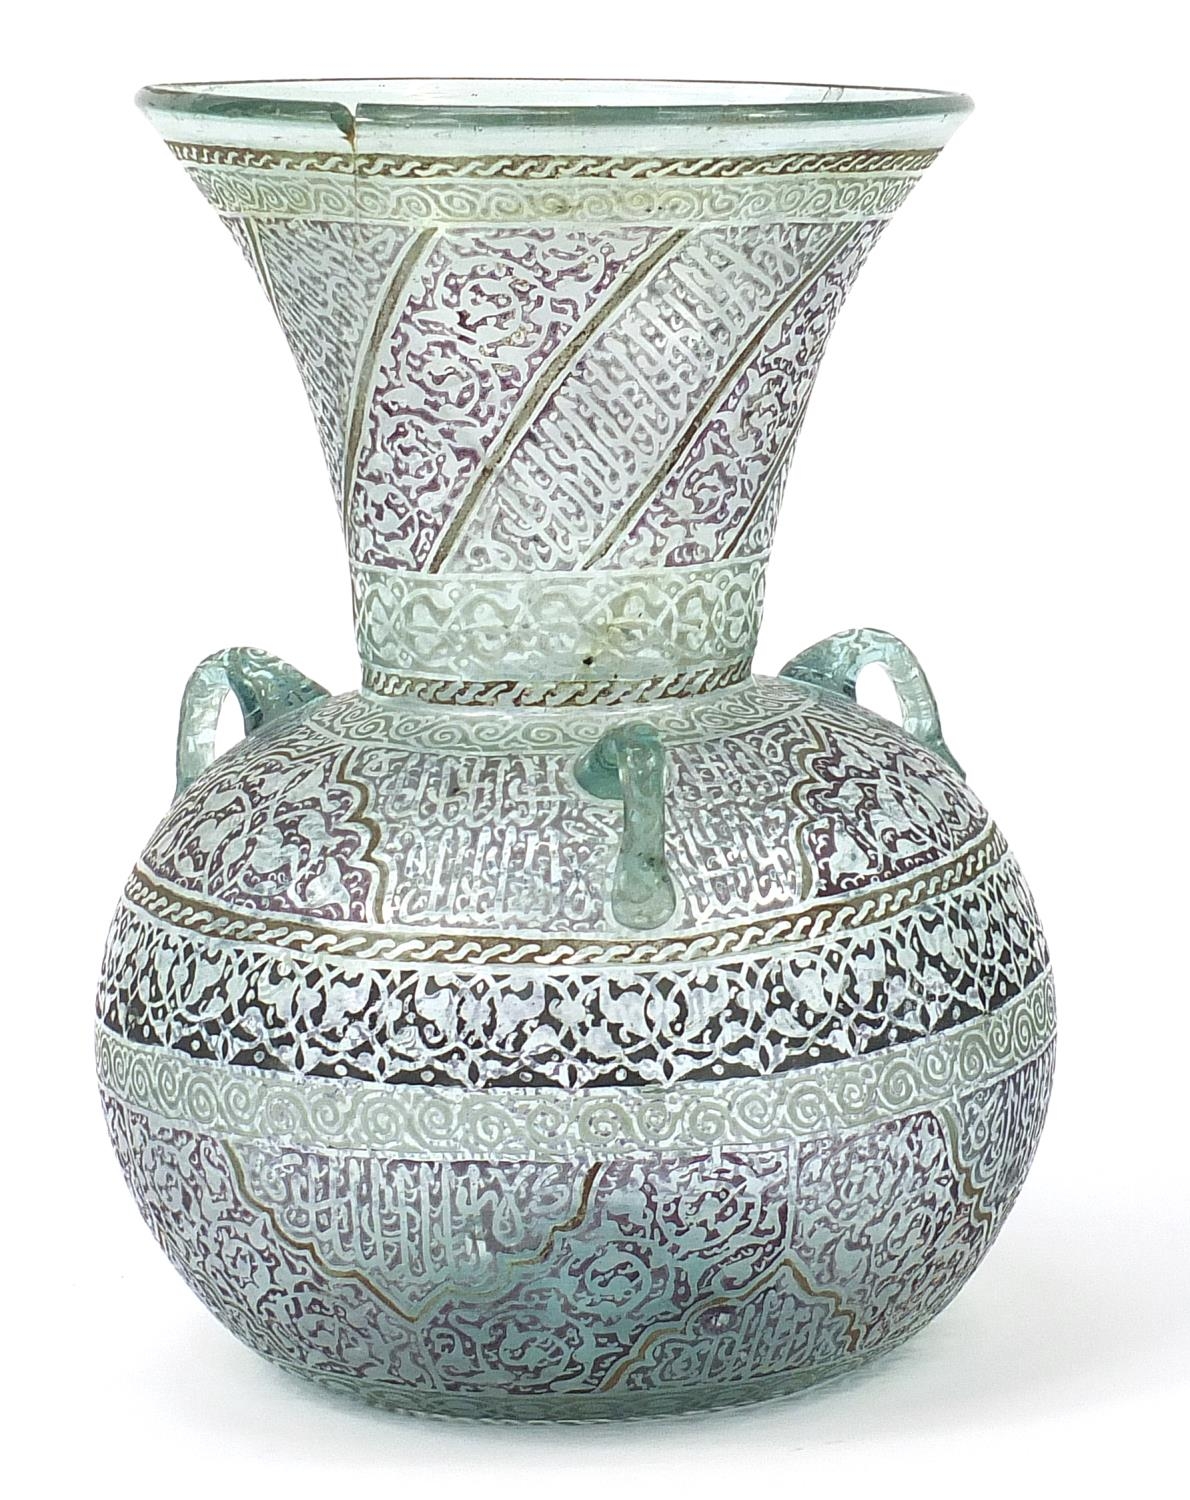 Antique Islamic Mamluk Revival glass mosque lantern engraved with calligraphy and flowers, 31.5cm - Image 2 of 4